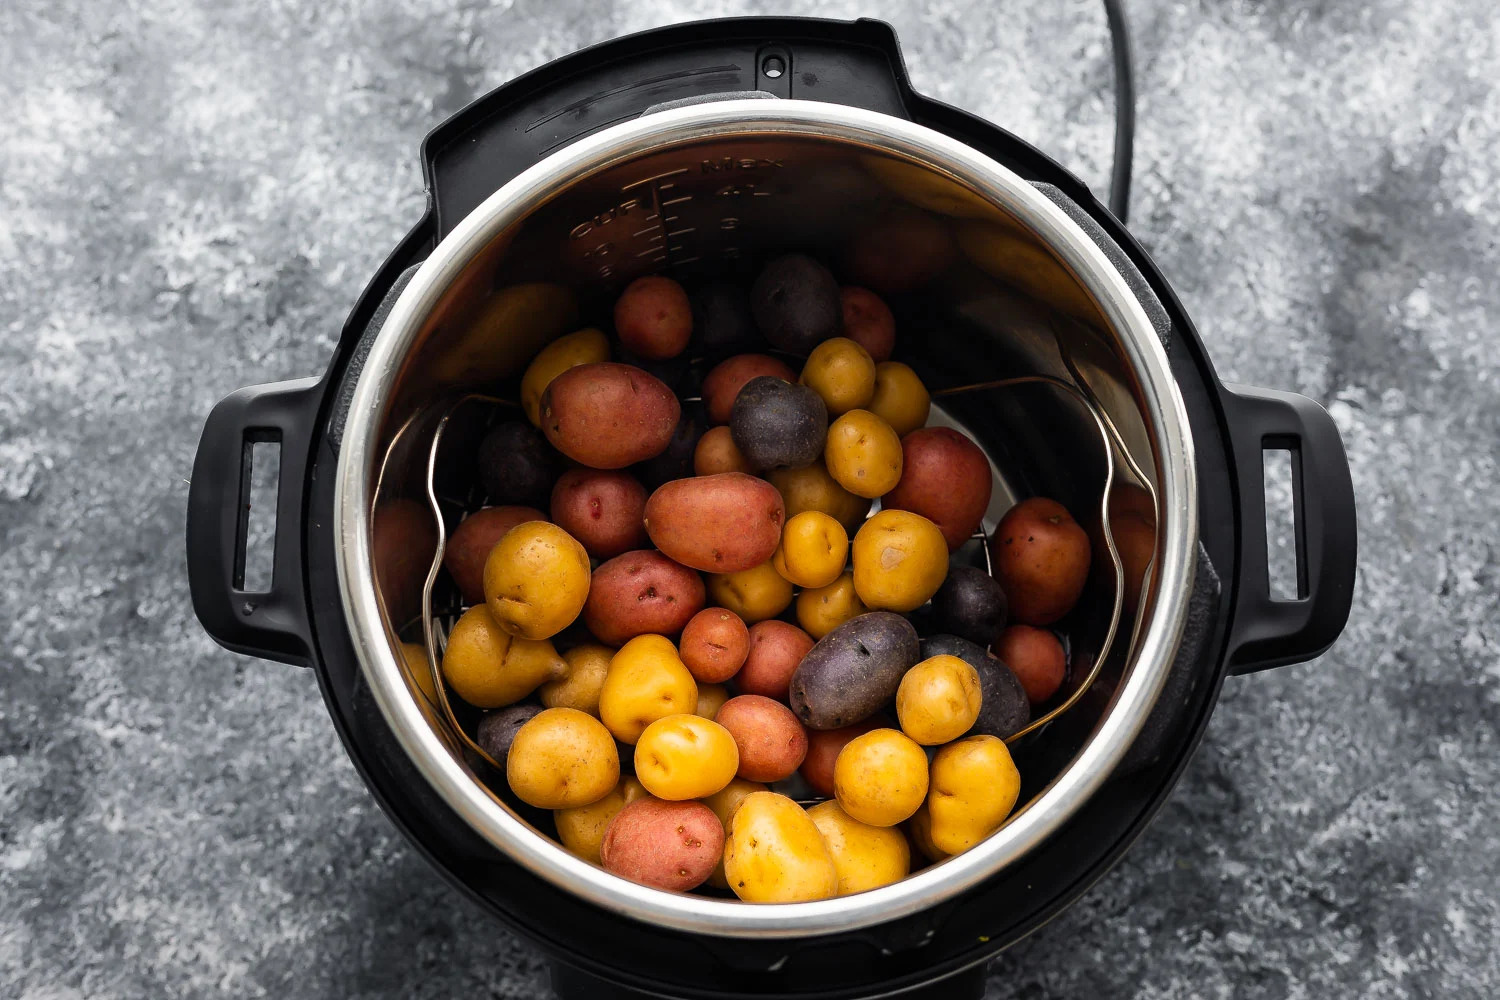 How To Steam Baby Potatoes In Electric Pressure Cooker